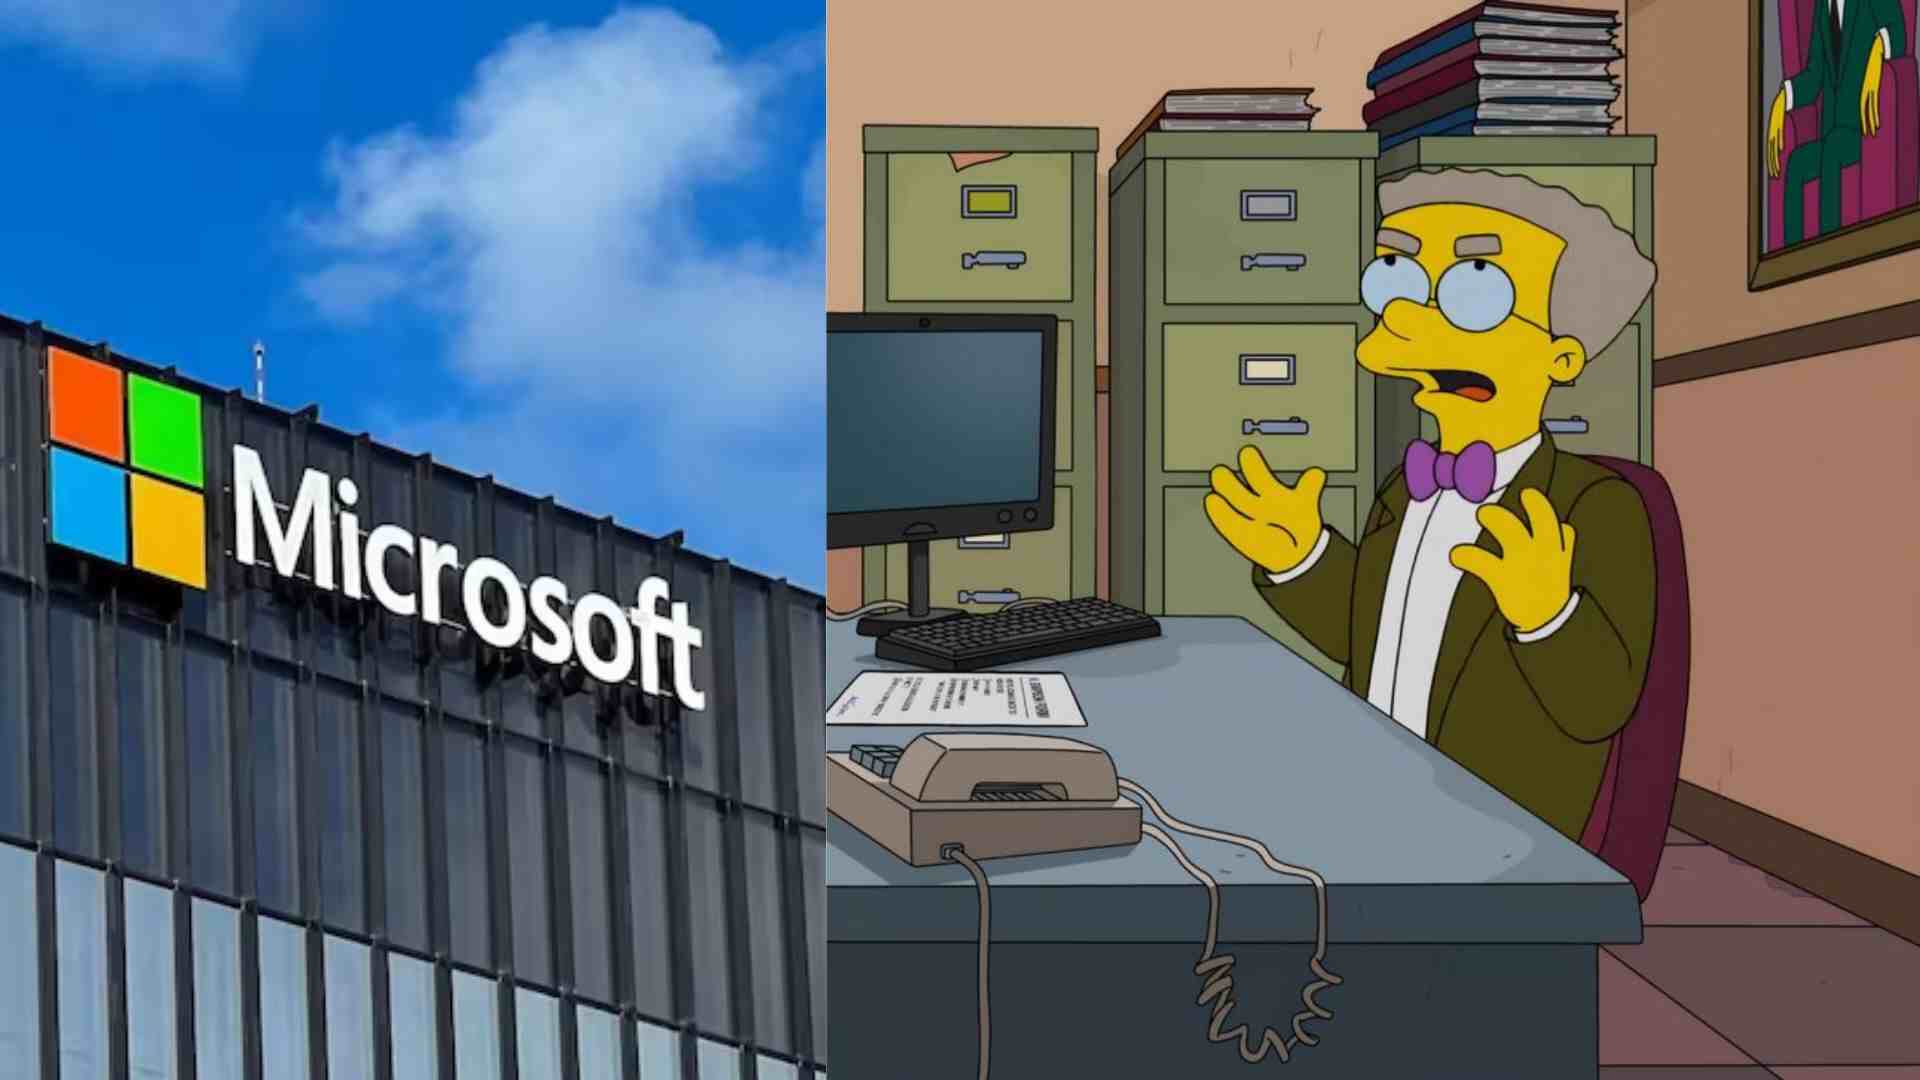 The Simpsons Predicted Microsoft’s IT Outage? Social Media Theories Abound